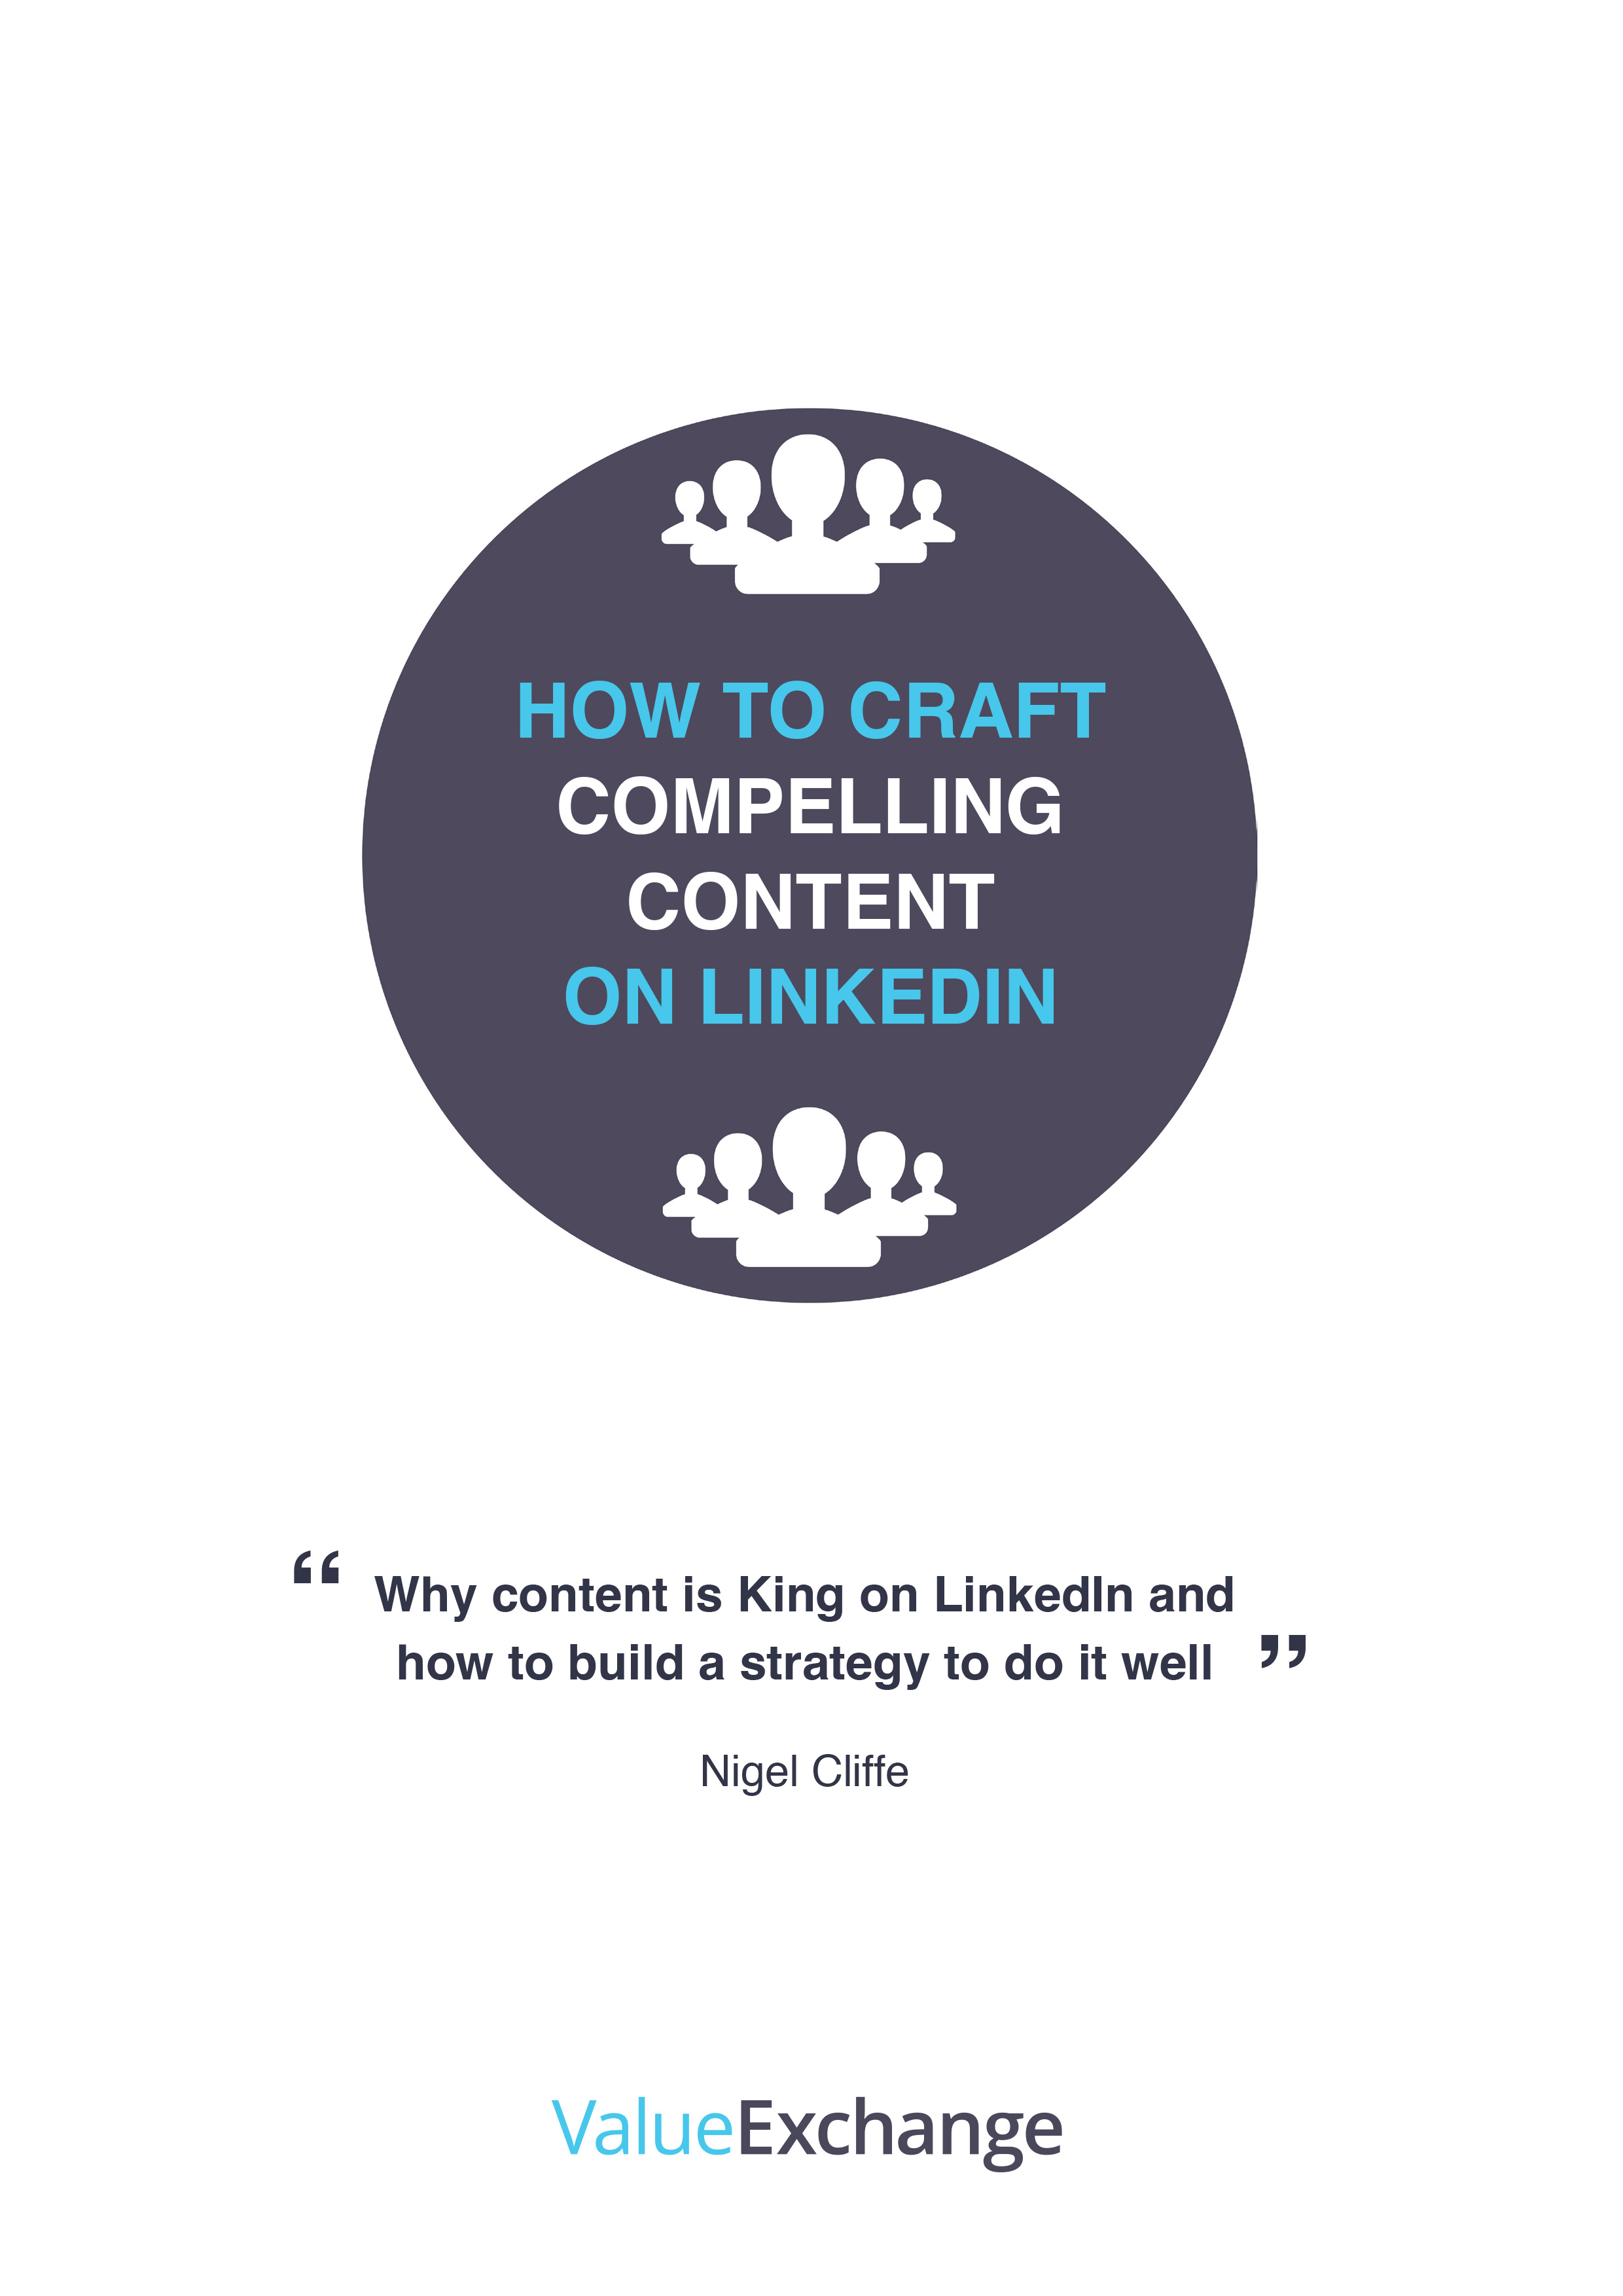 How to Create Compelling Content on LinkedIn by Nigel Cliffe